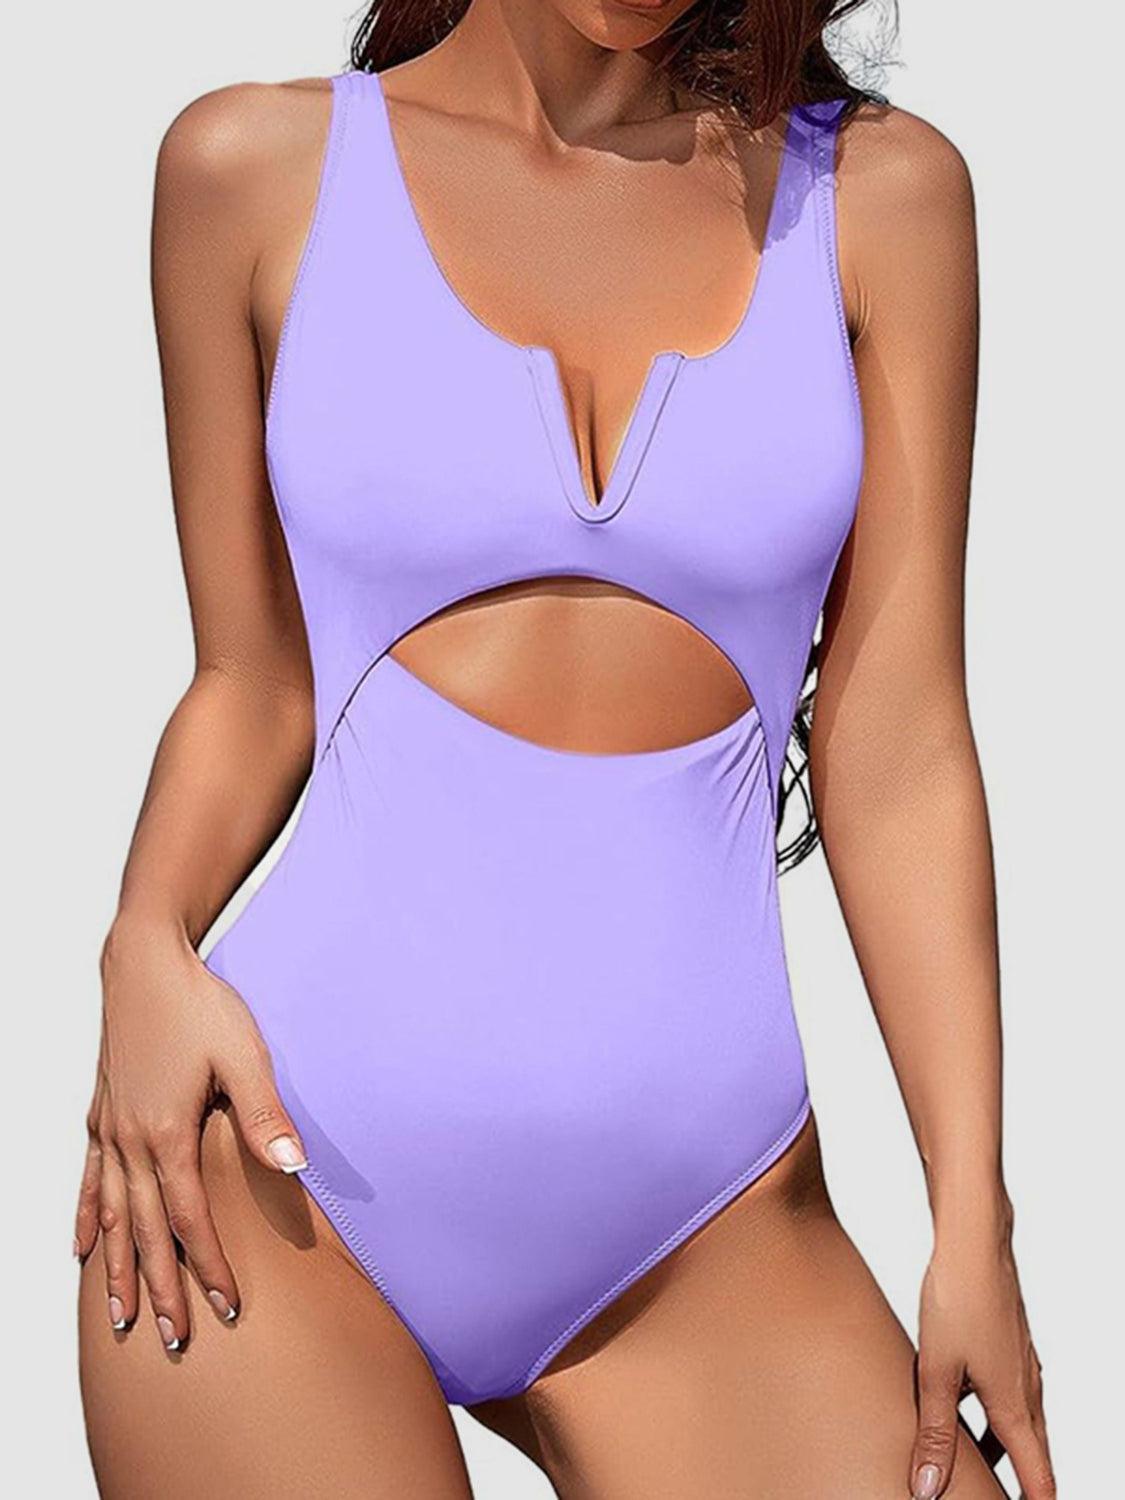 a woman wearing a purple swimsuit with cut outs